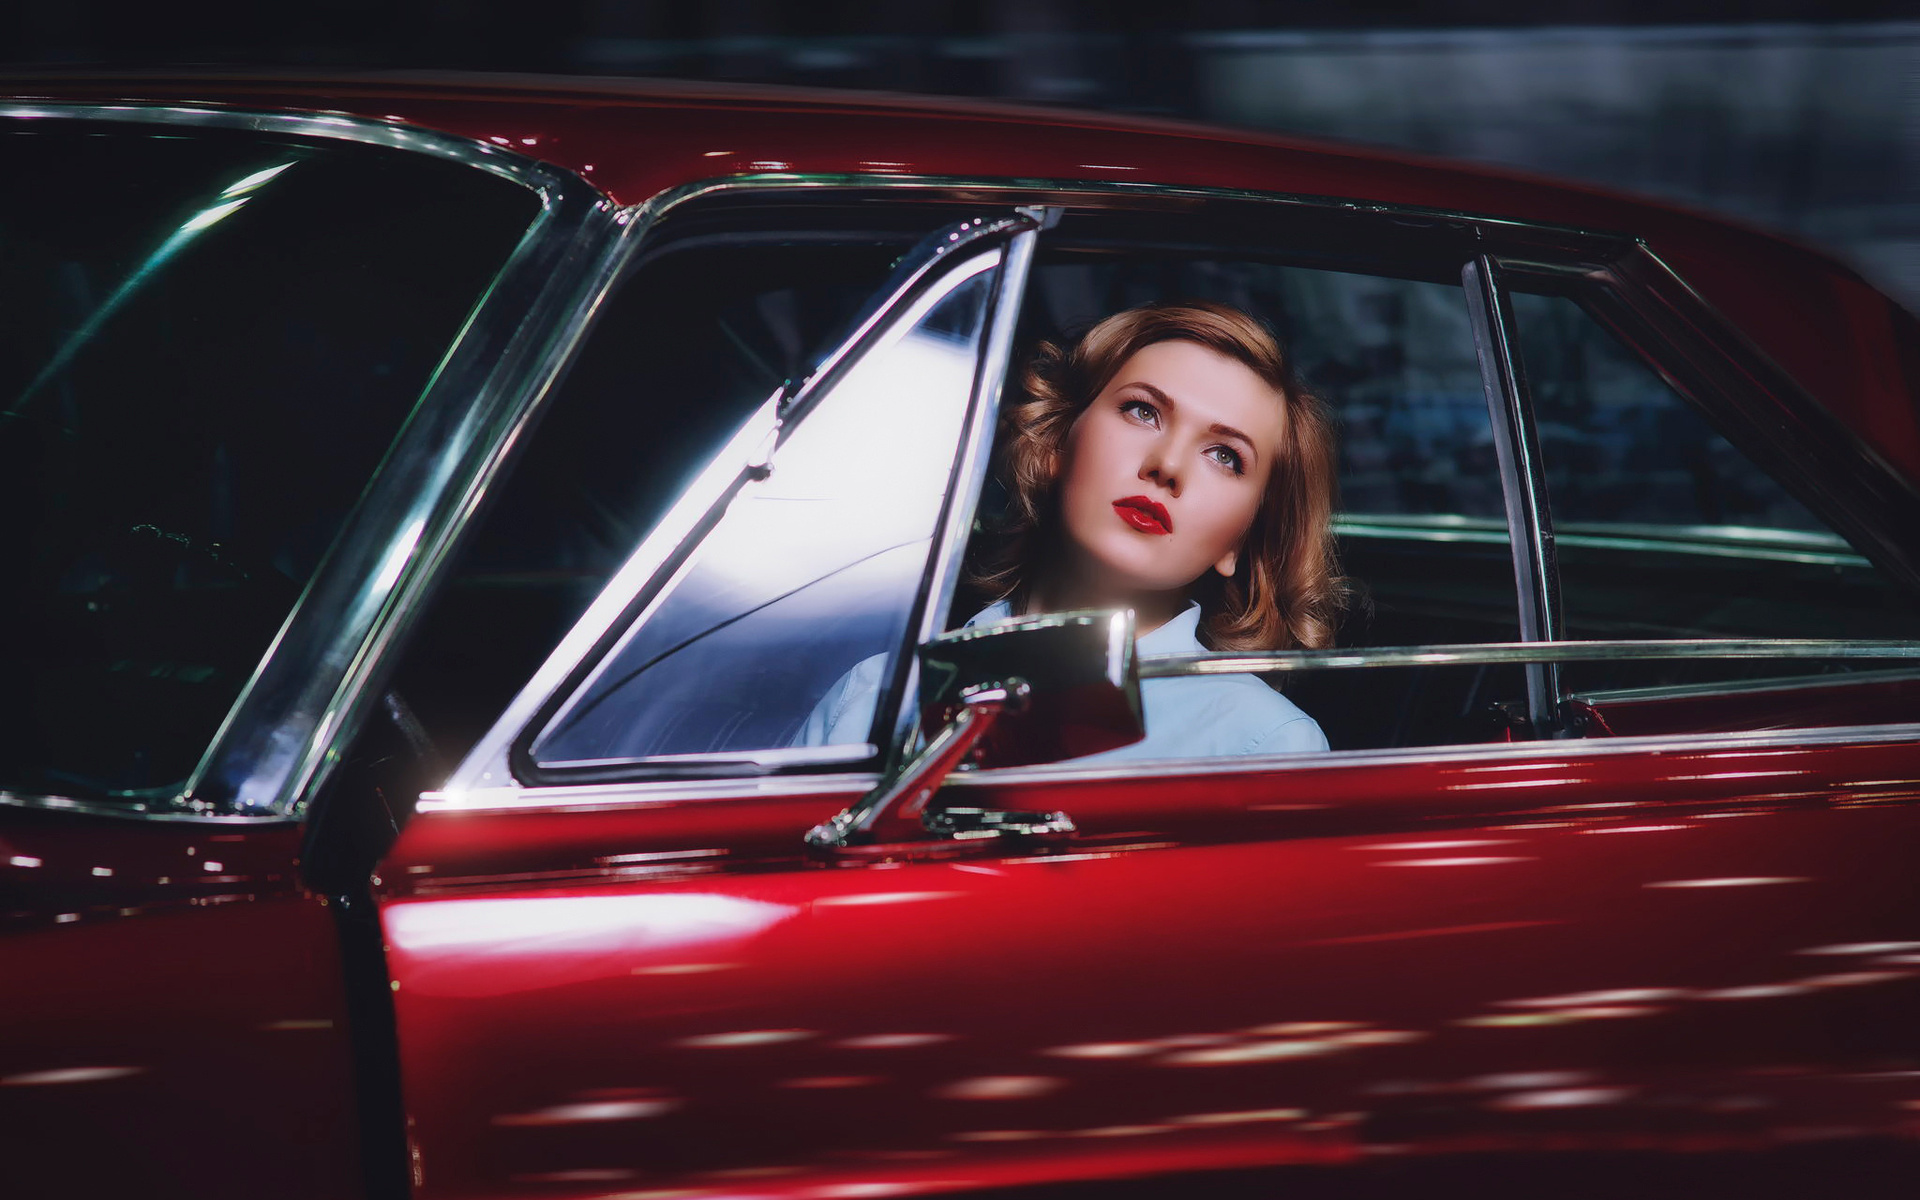 People 1920x1200 women car lipstick women with cars model vehicle vintage classic car red cars red lipstick looking up makeup